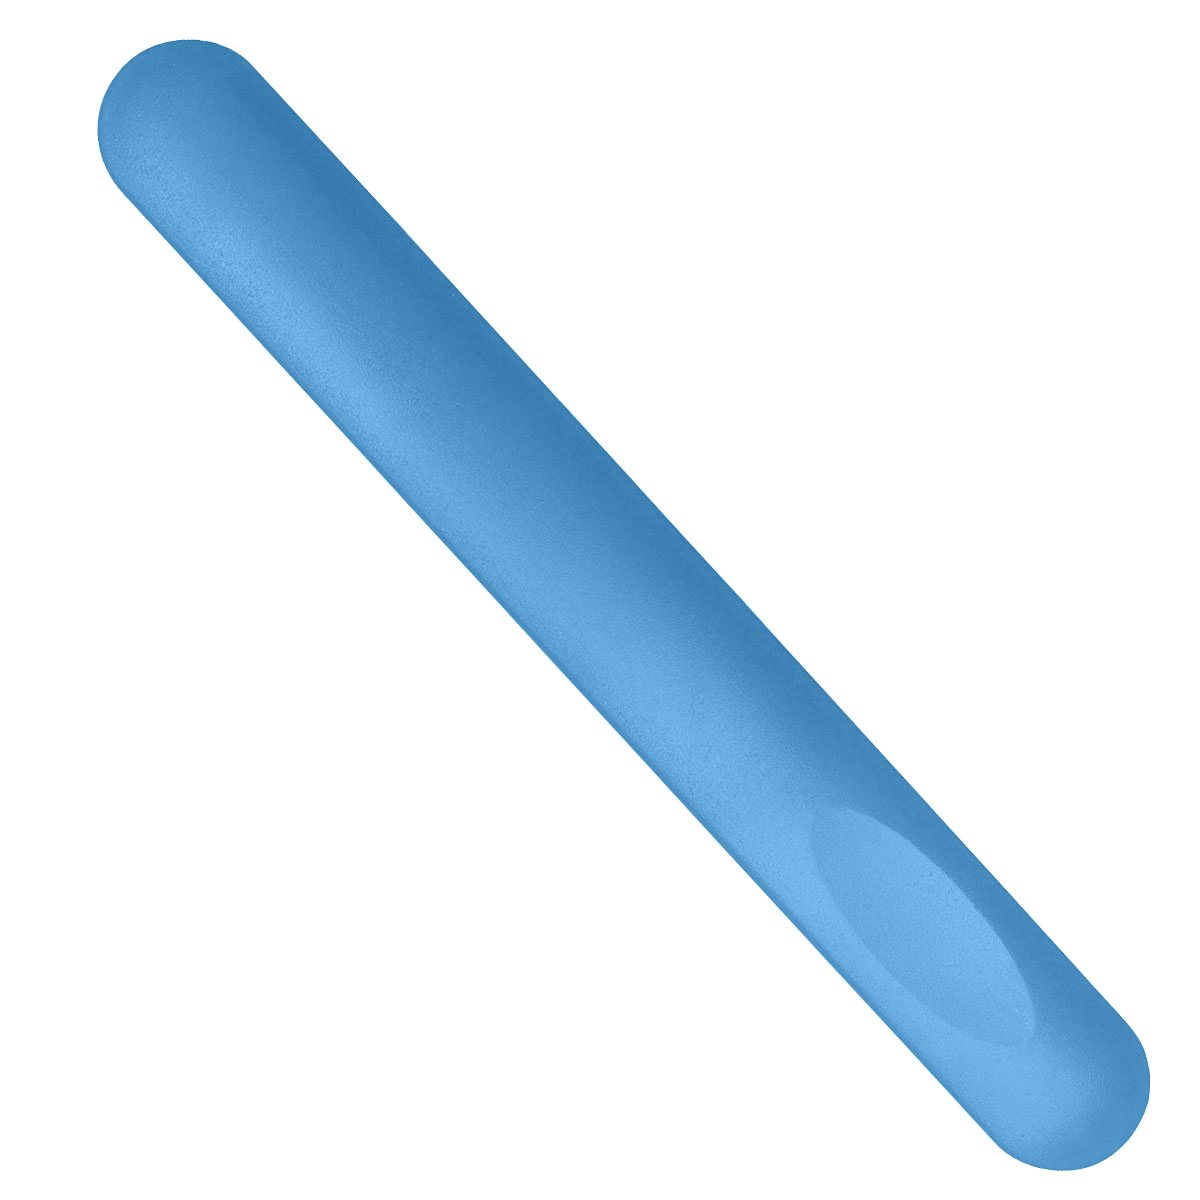 Light Blue Nail File in Sleeve